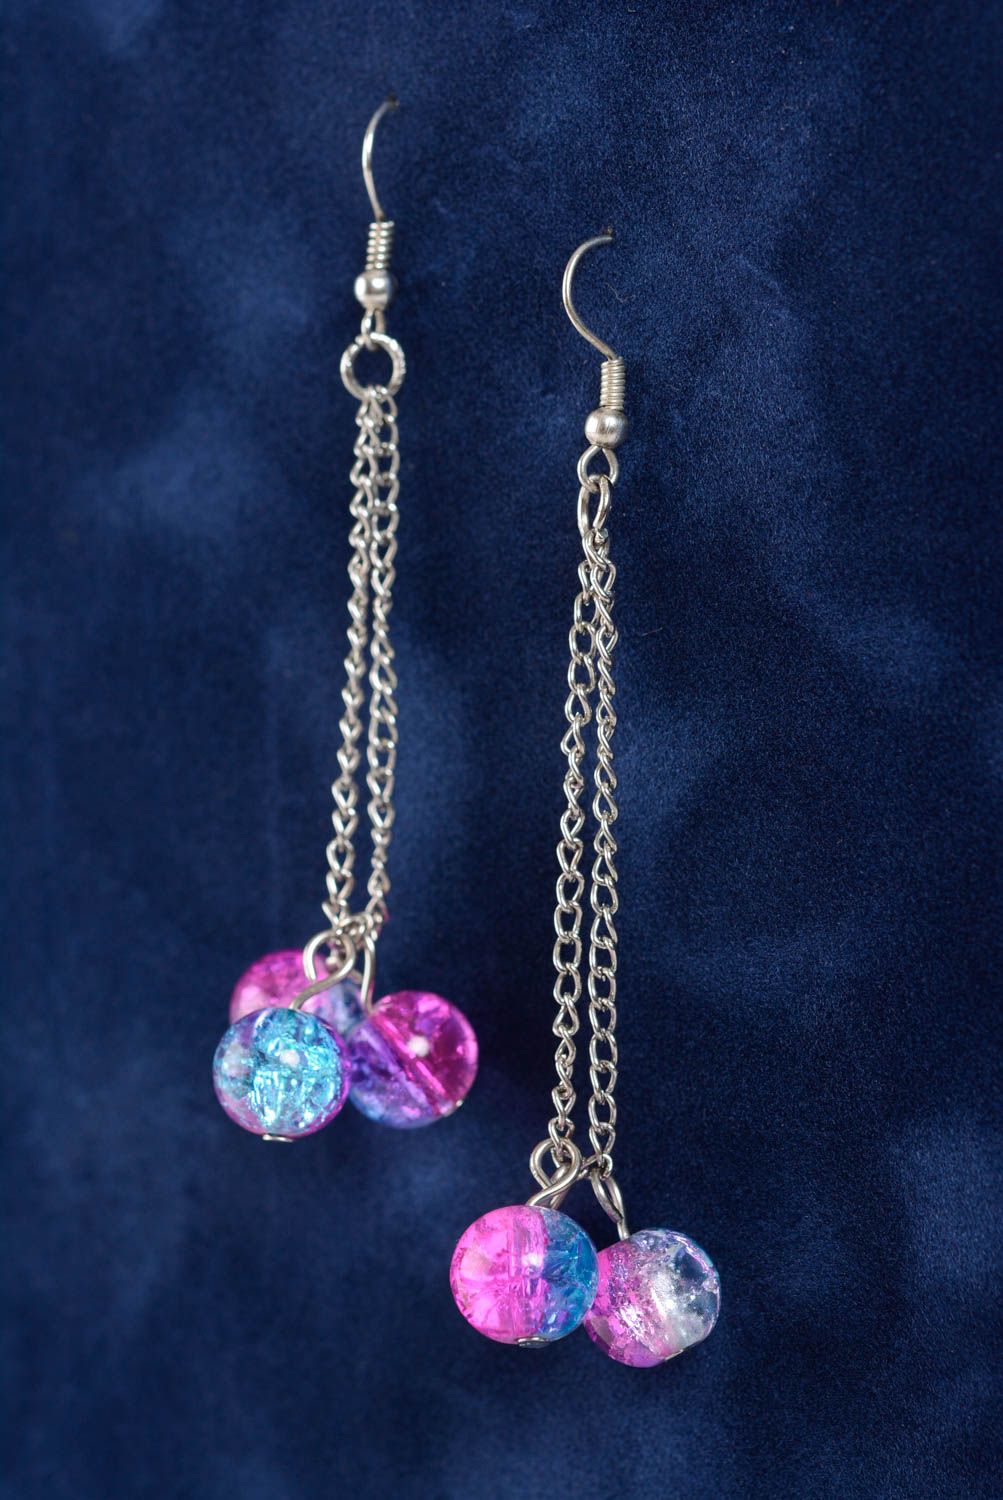 Handmade earrings with glass pink beads on long chains designer jewelry photo 2